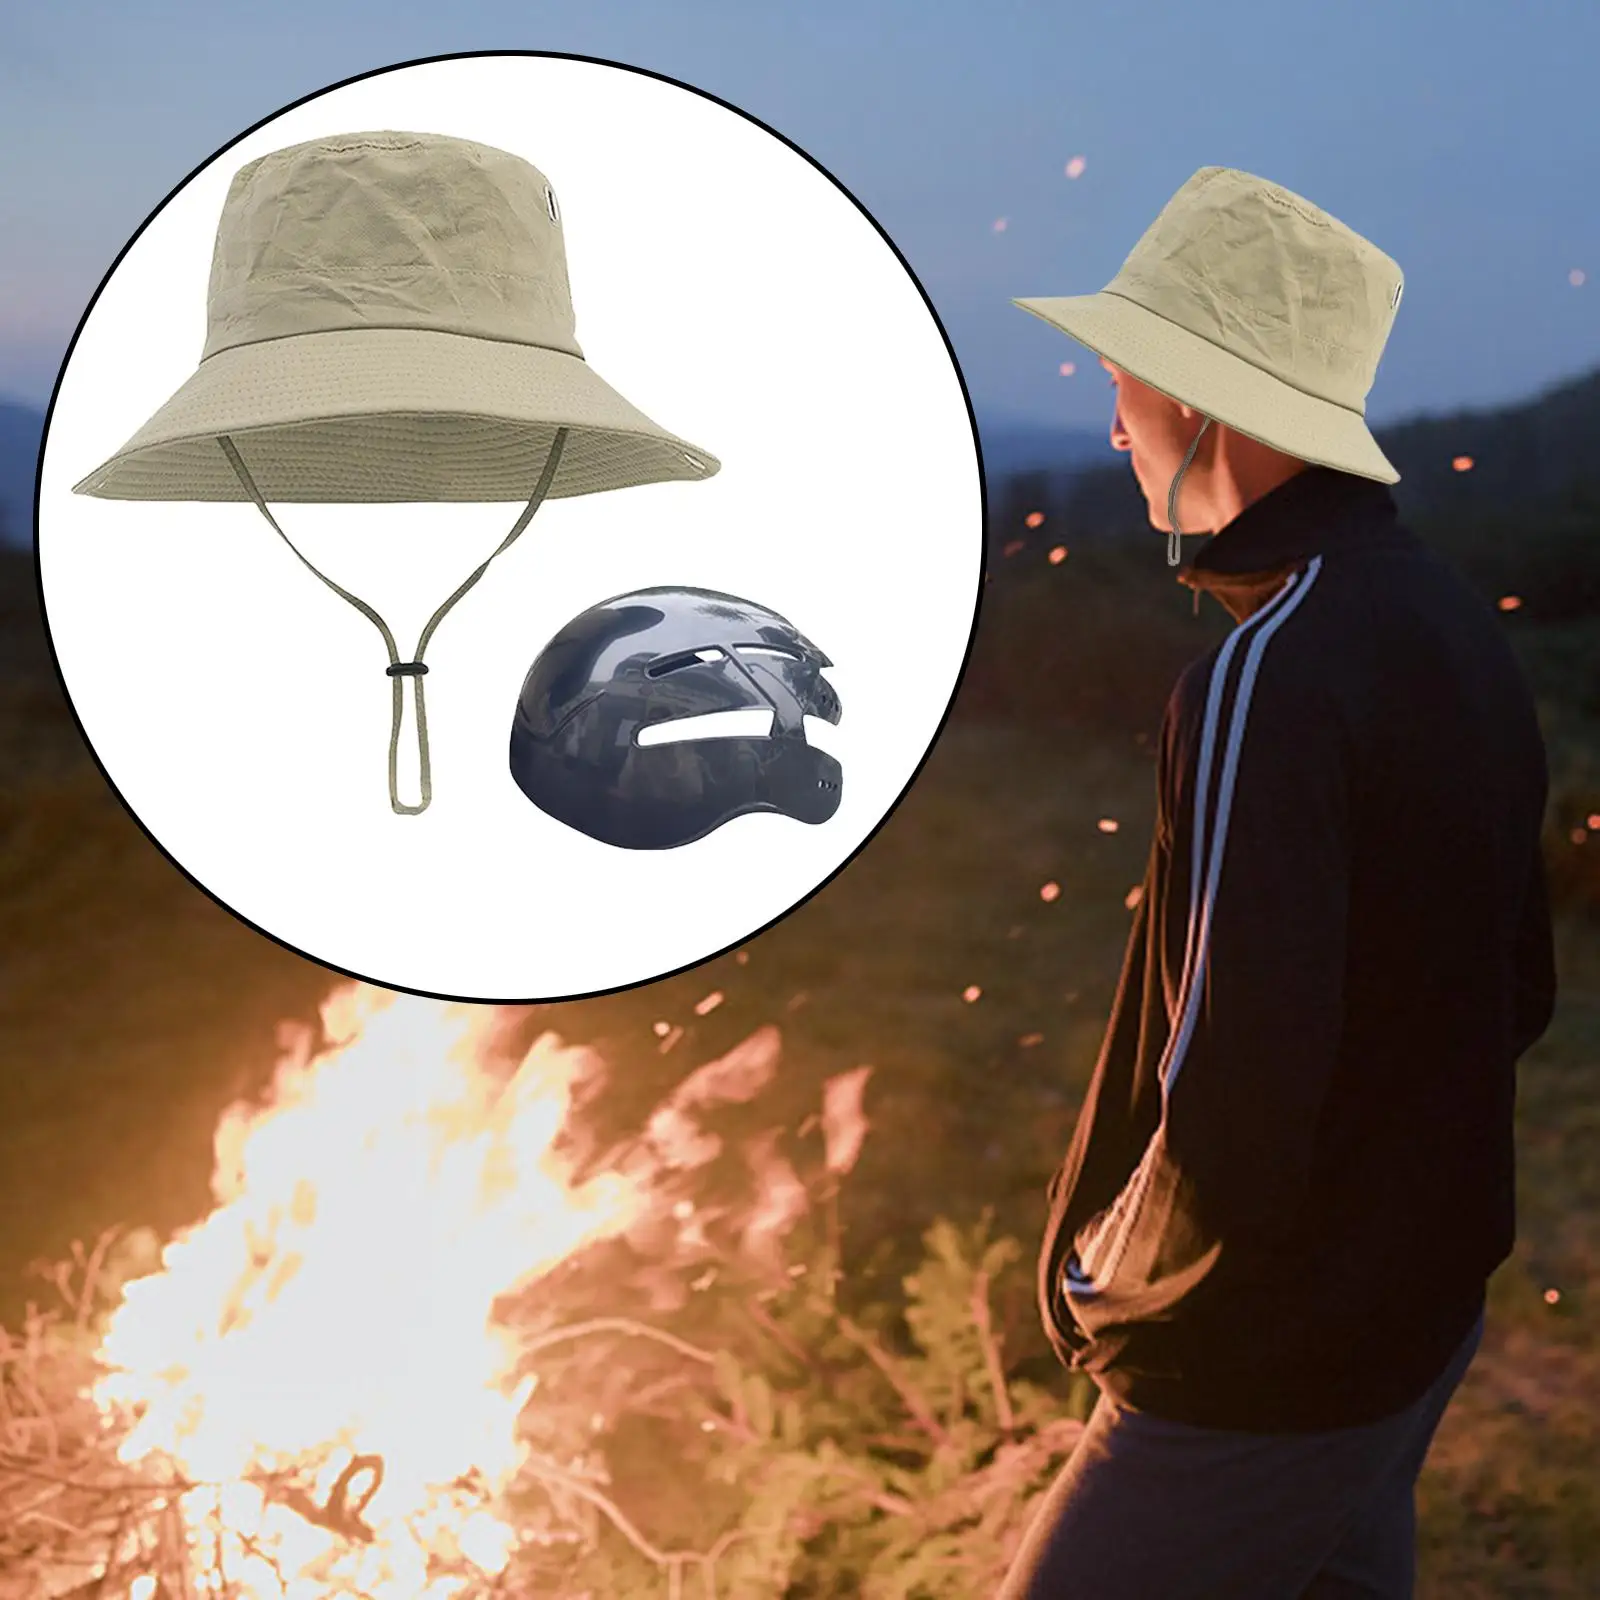 Bucket Hat with Strings Foldable Wide Brim for Sun Protection Packable Sun Hat with Strap for Getaway Beach Fishing Outdoor